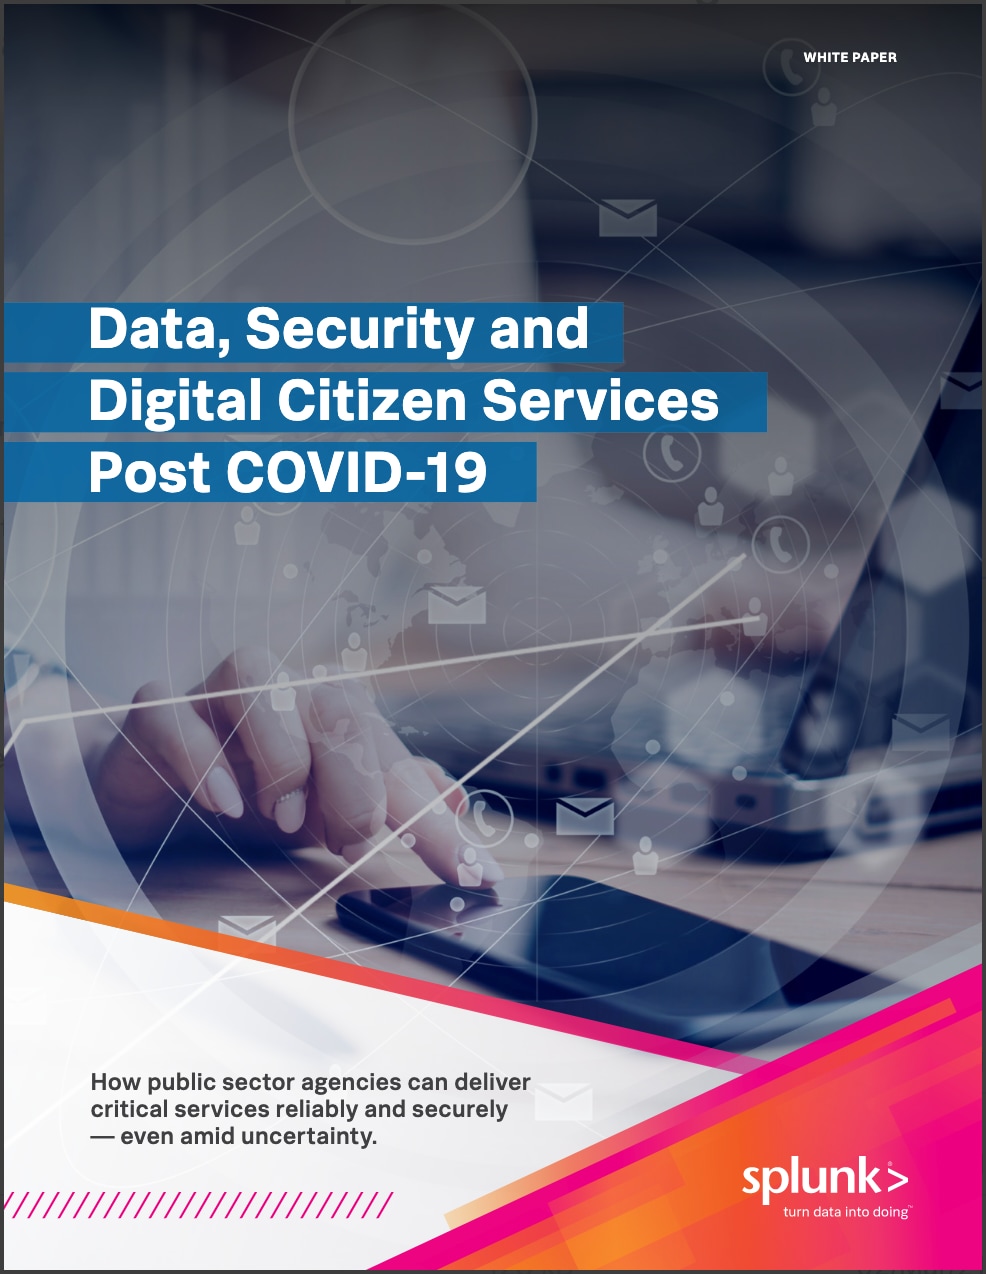 Data, Security and Digital Citizen Services Post Covid-19